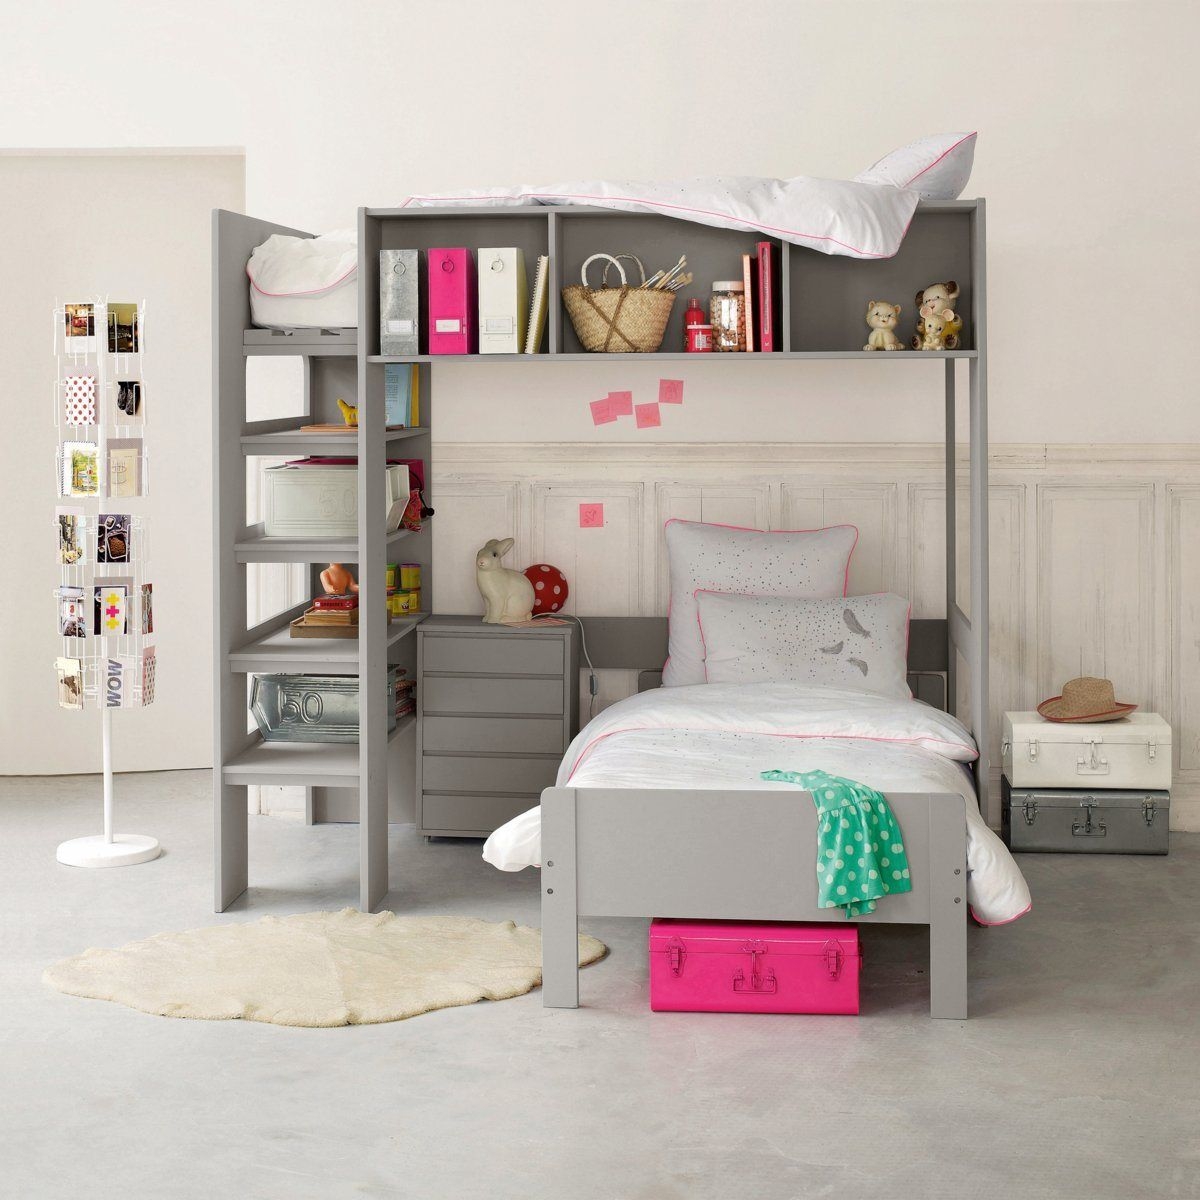 Childrens bunk beds with storage